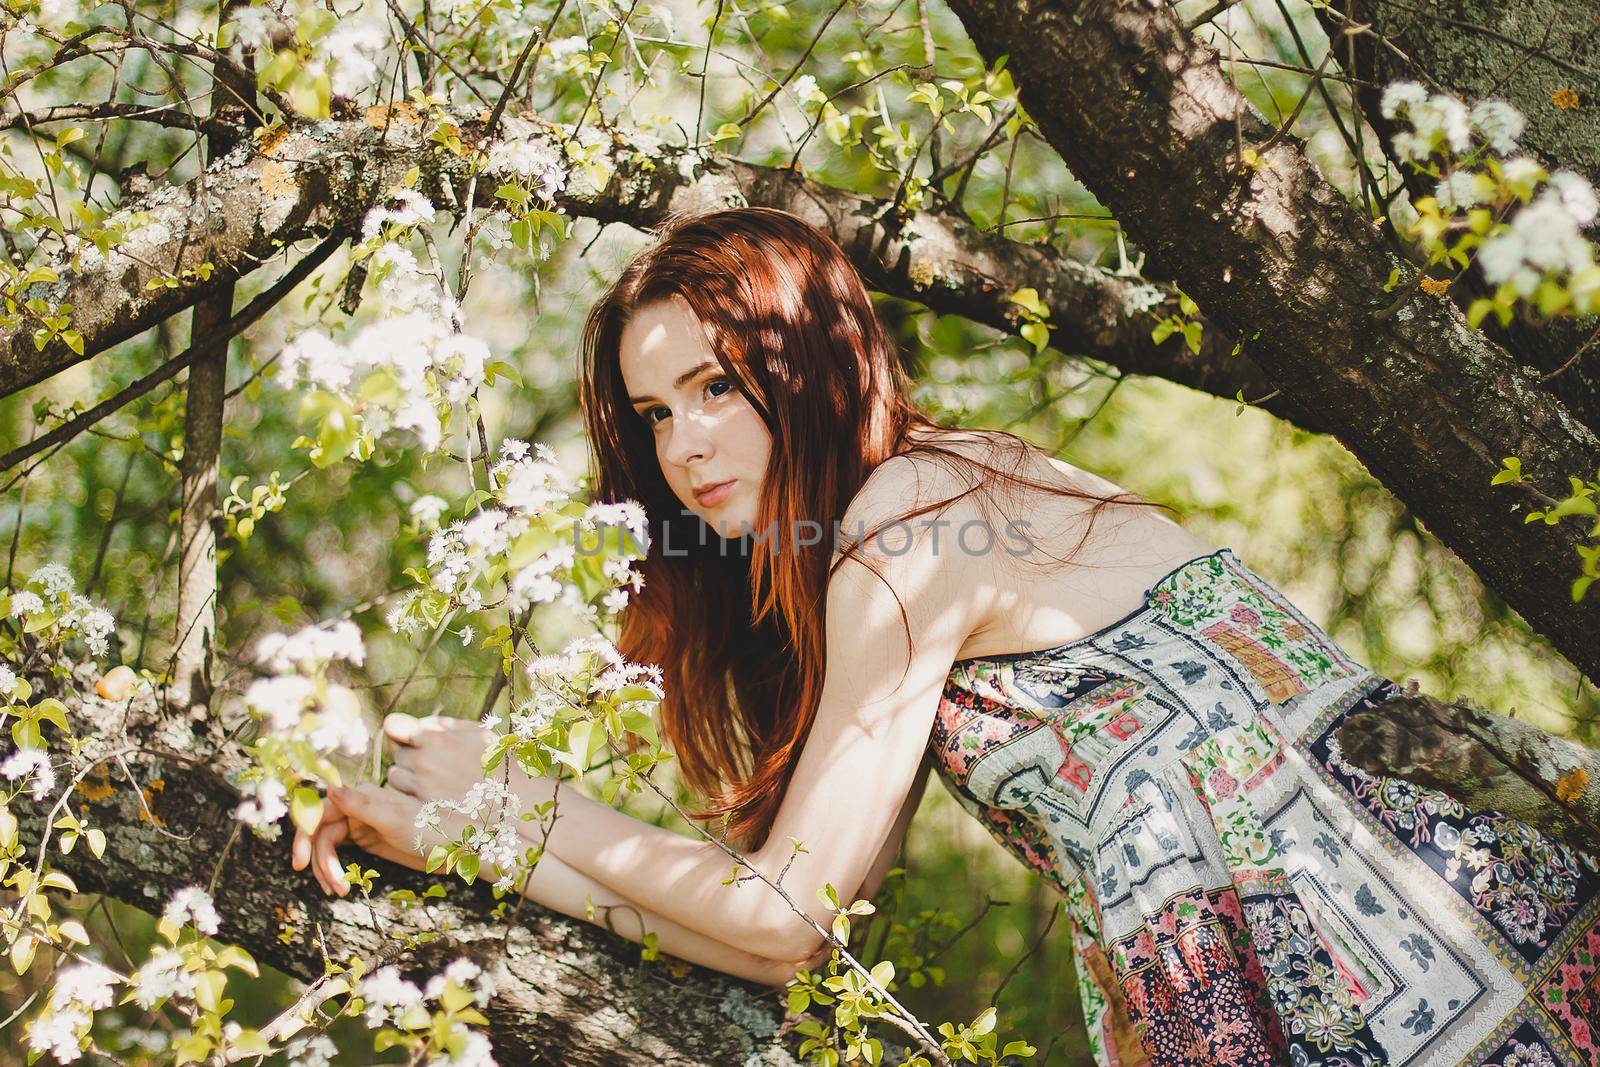 Portrait of carefree young woman in boho style dress in spring cherry blossom garden.